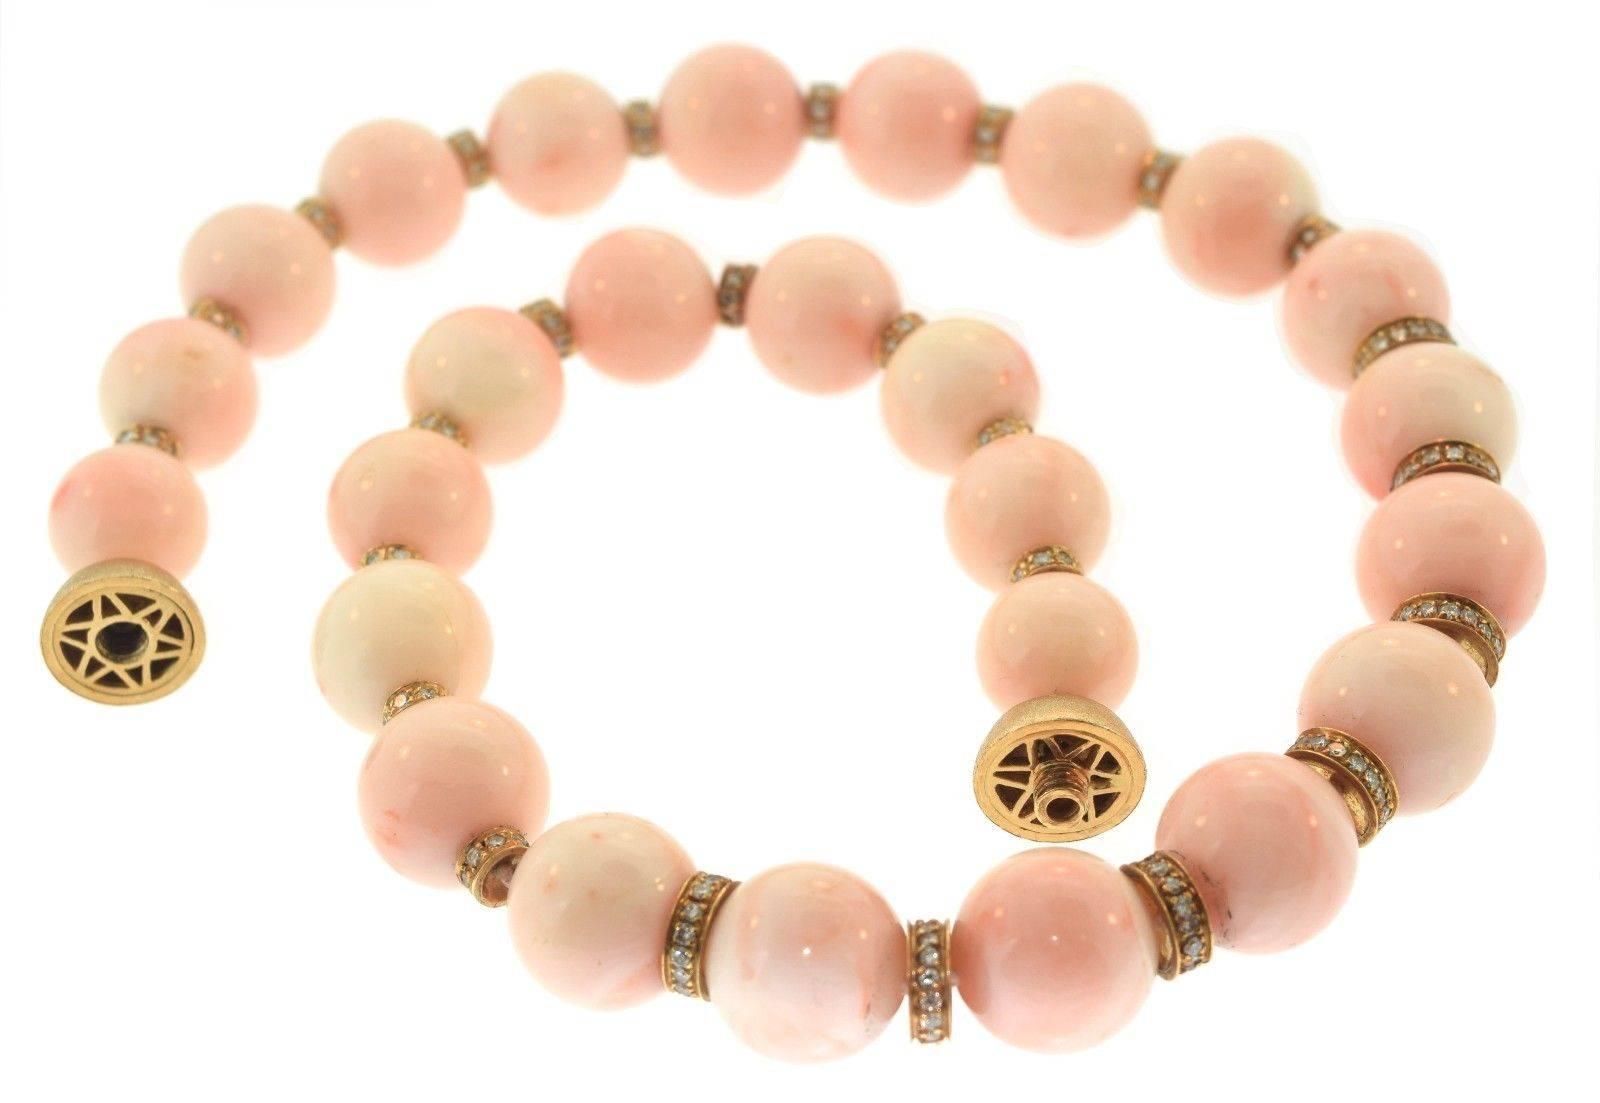 A gorgeous strand of 14 mm carved angel skin coral beads and 18k yellow gold, accented with beautiful  diamonds, weighting an estimated total 3.2 carats; fitted with a magnificent 18k yellow gold clasp.

Metal: 18k of Yellow Gold
Stone: Angel